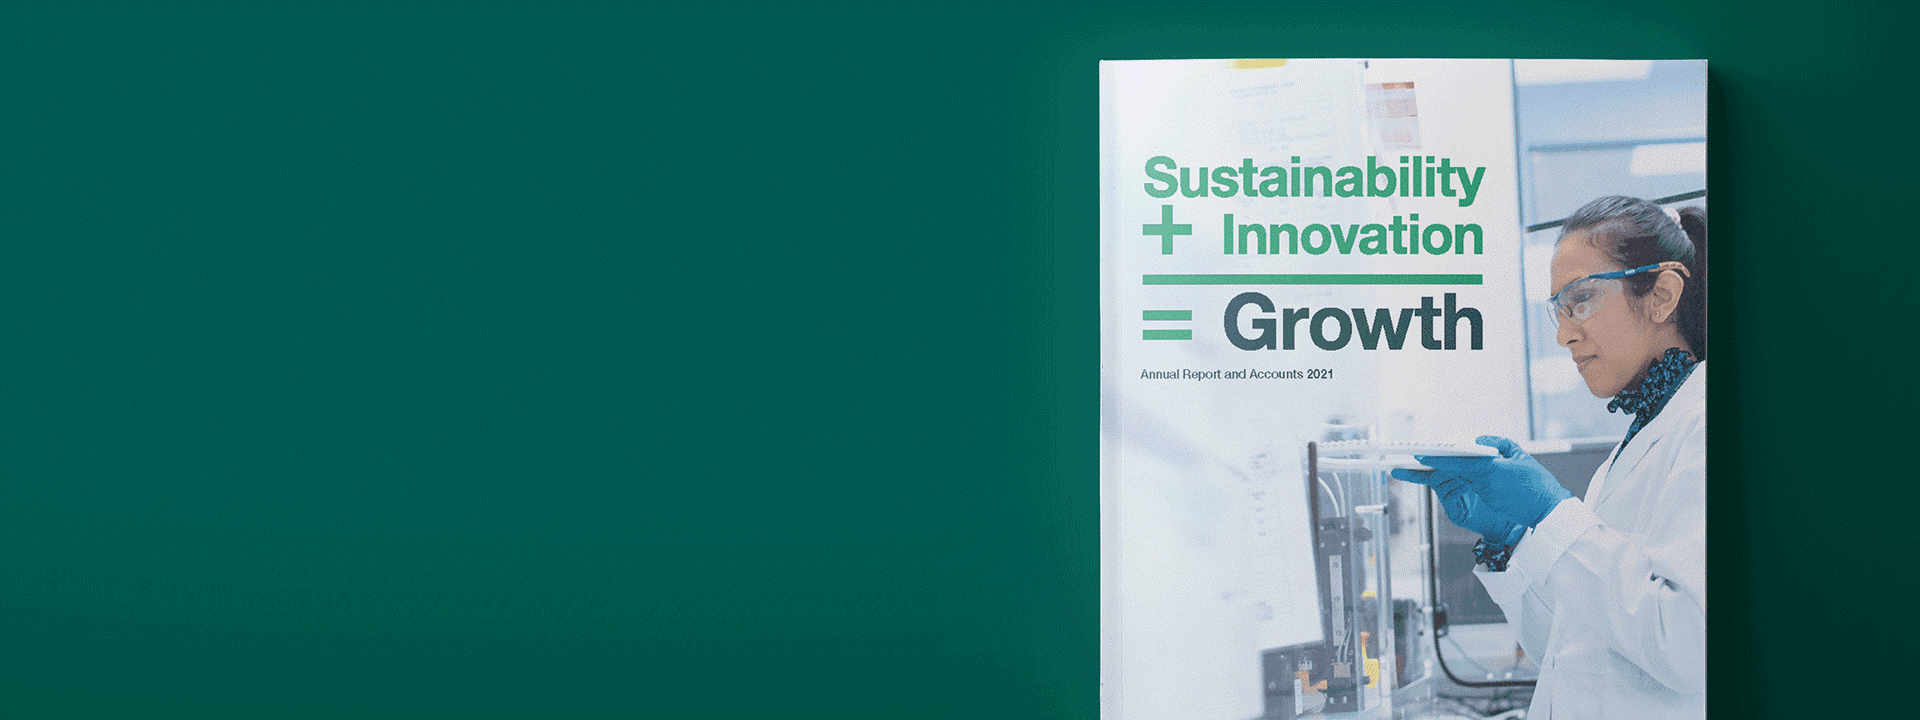 Product Croda: the core pillars of sustainability and innovation - Black Sun Global image